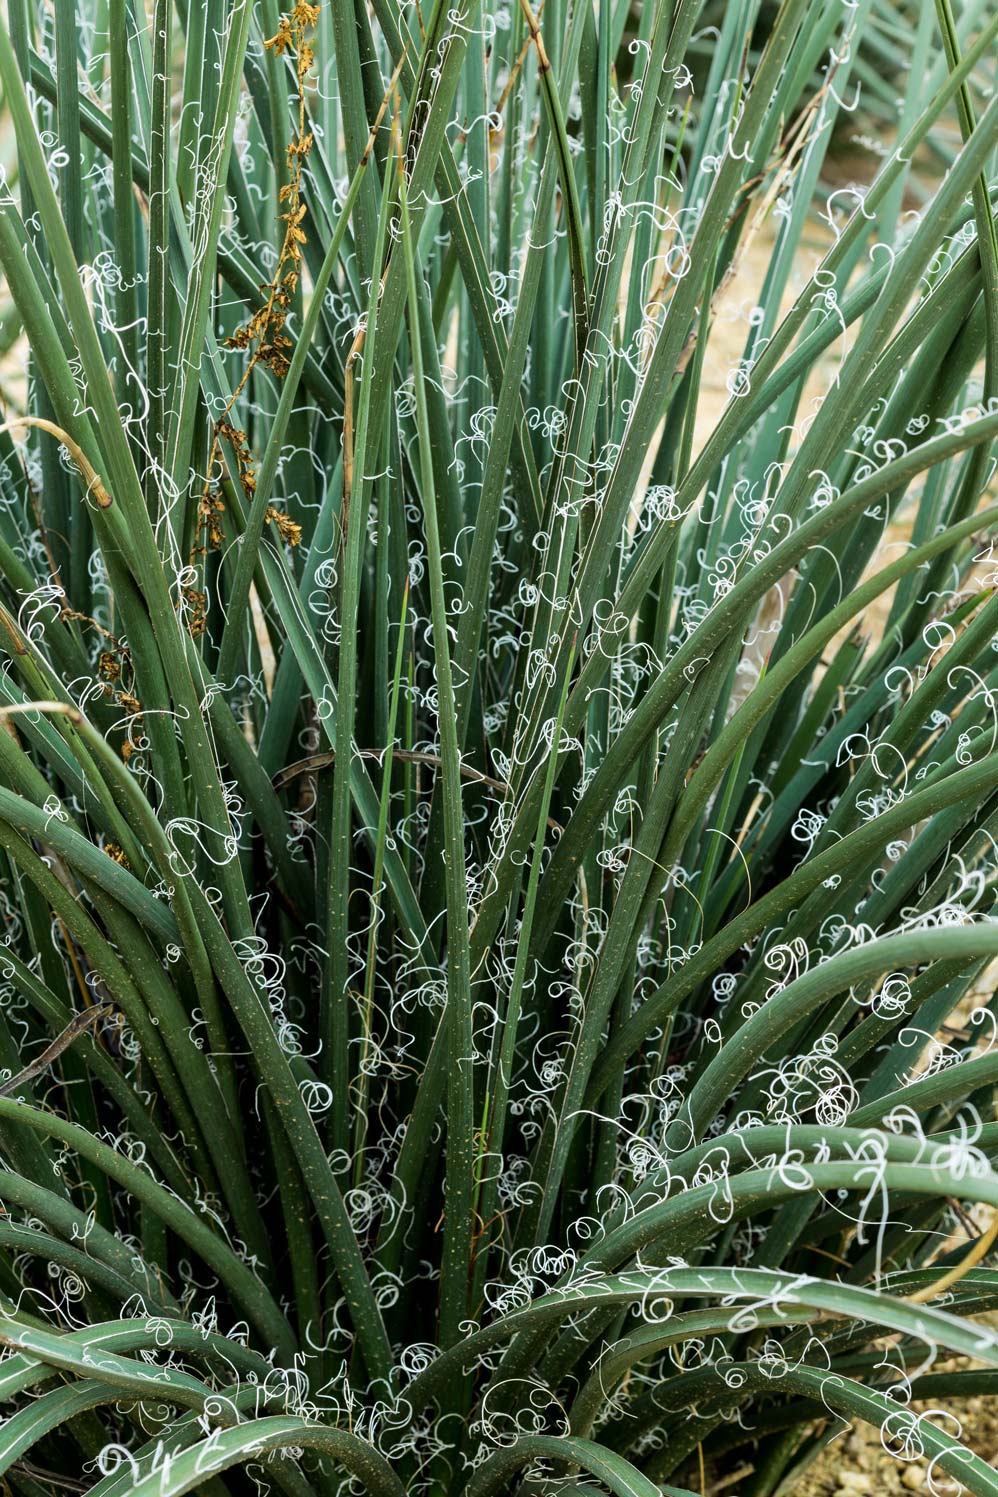 A close-up of the green leaves of Red Hesperaloe with their curly fibers.